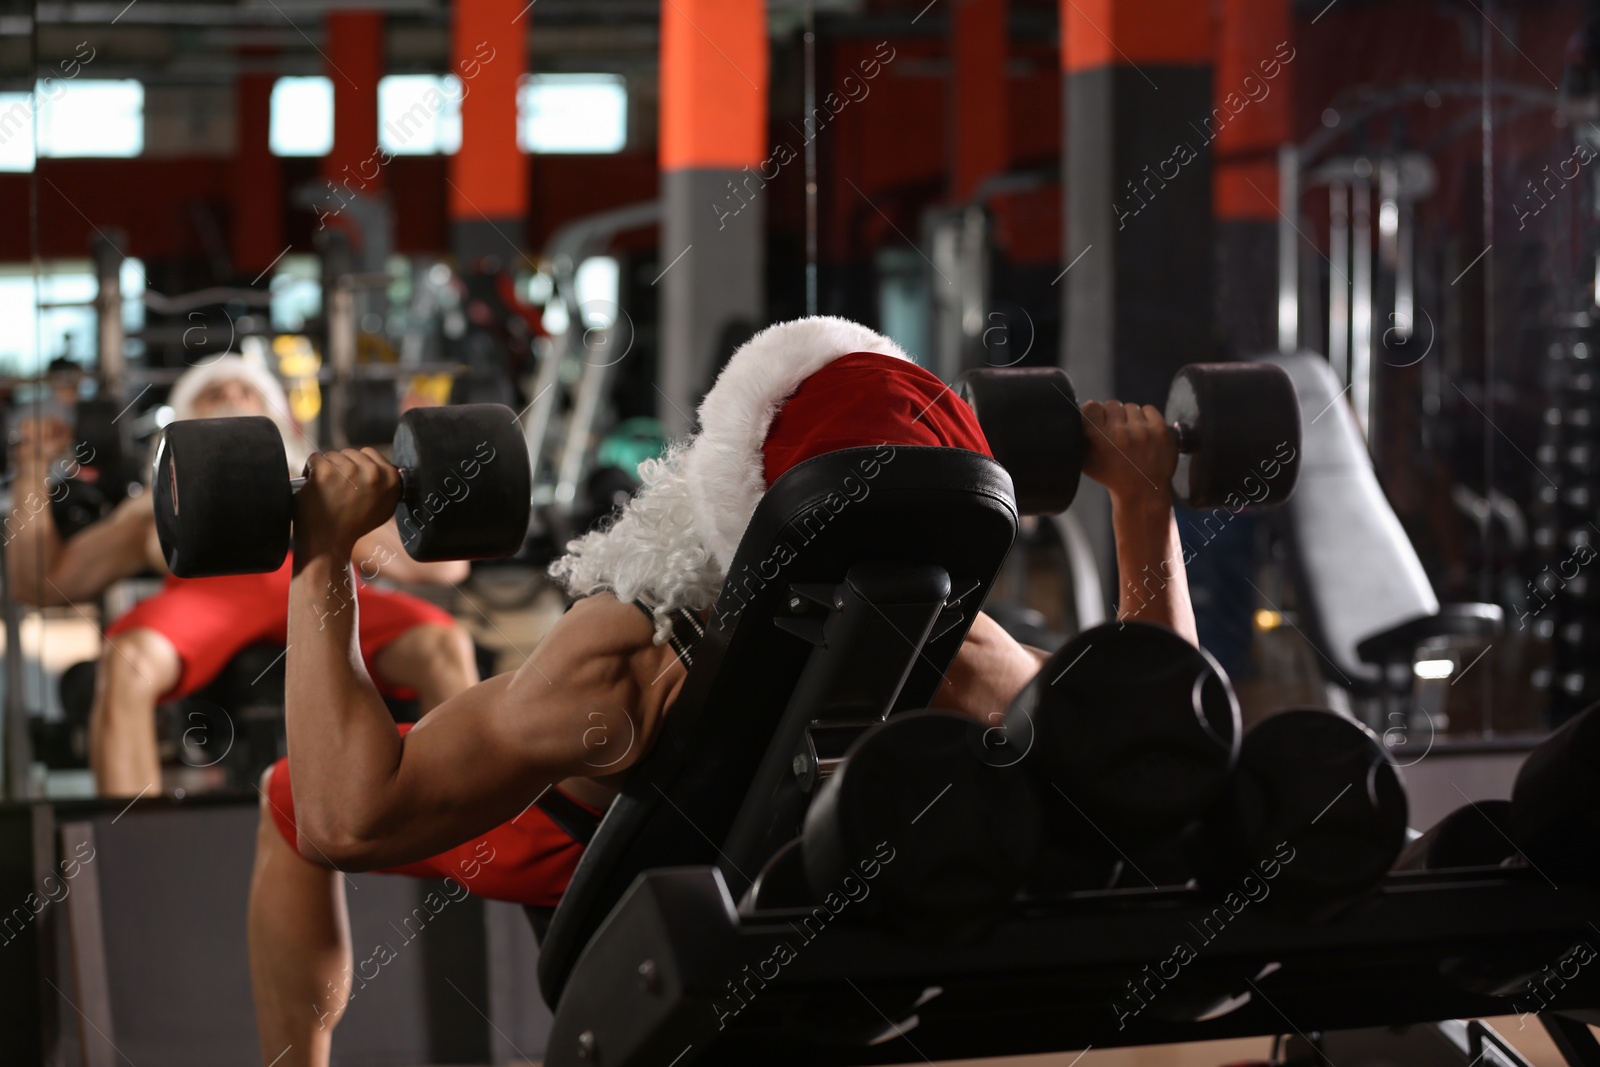 Photo of Young muscular man in Santa costume training with dumbbells at modern gym